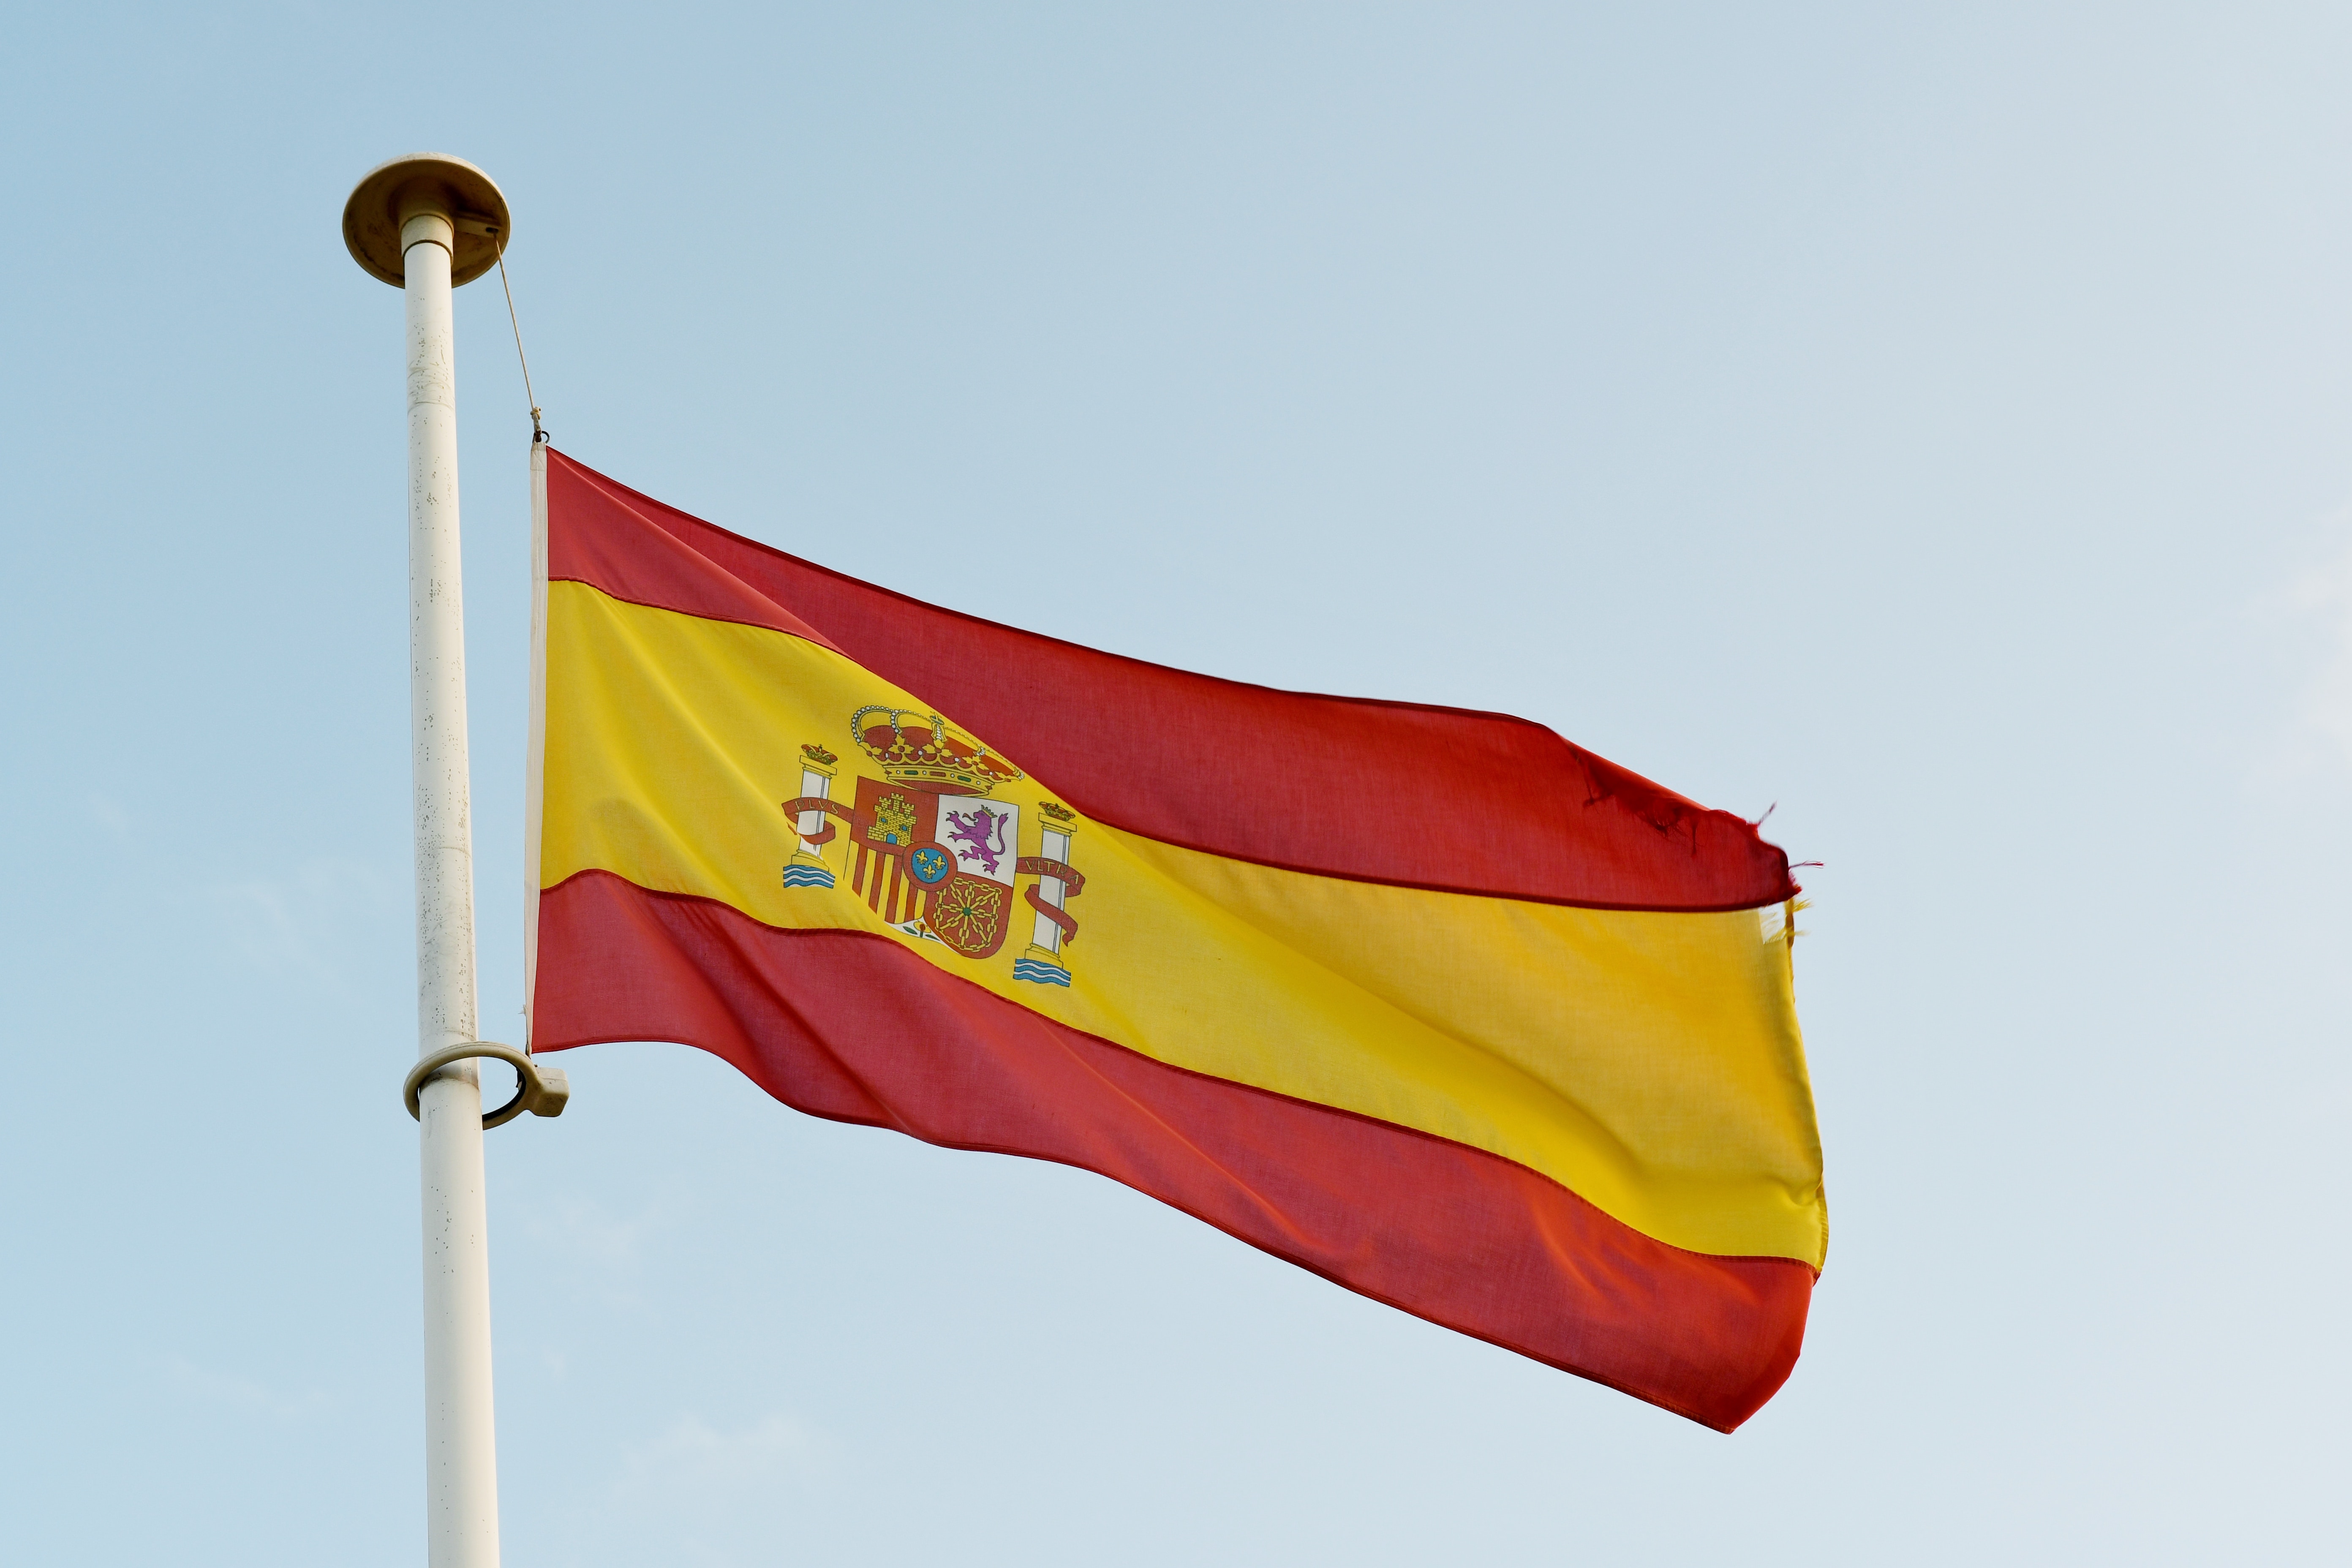 The flag of Spain 